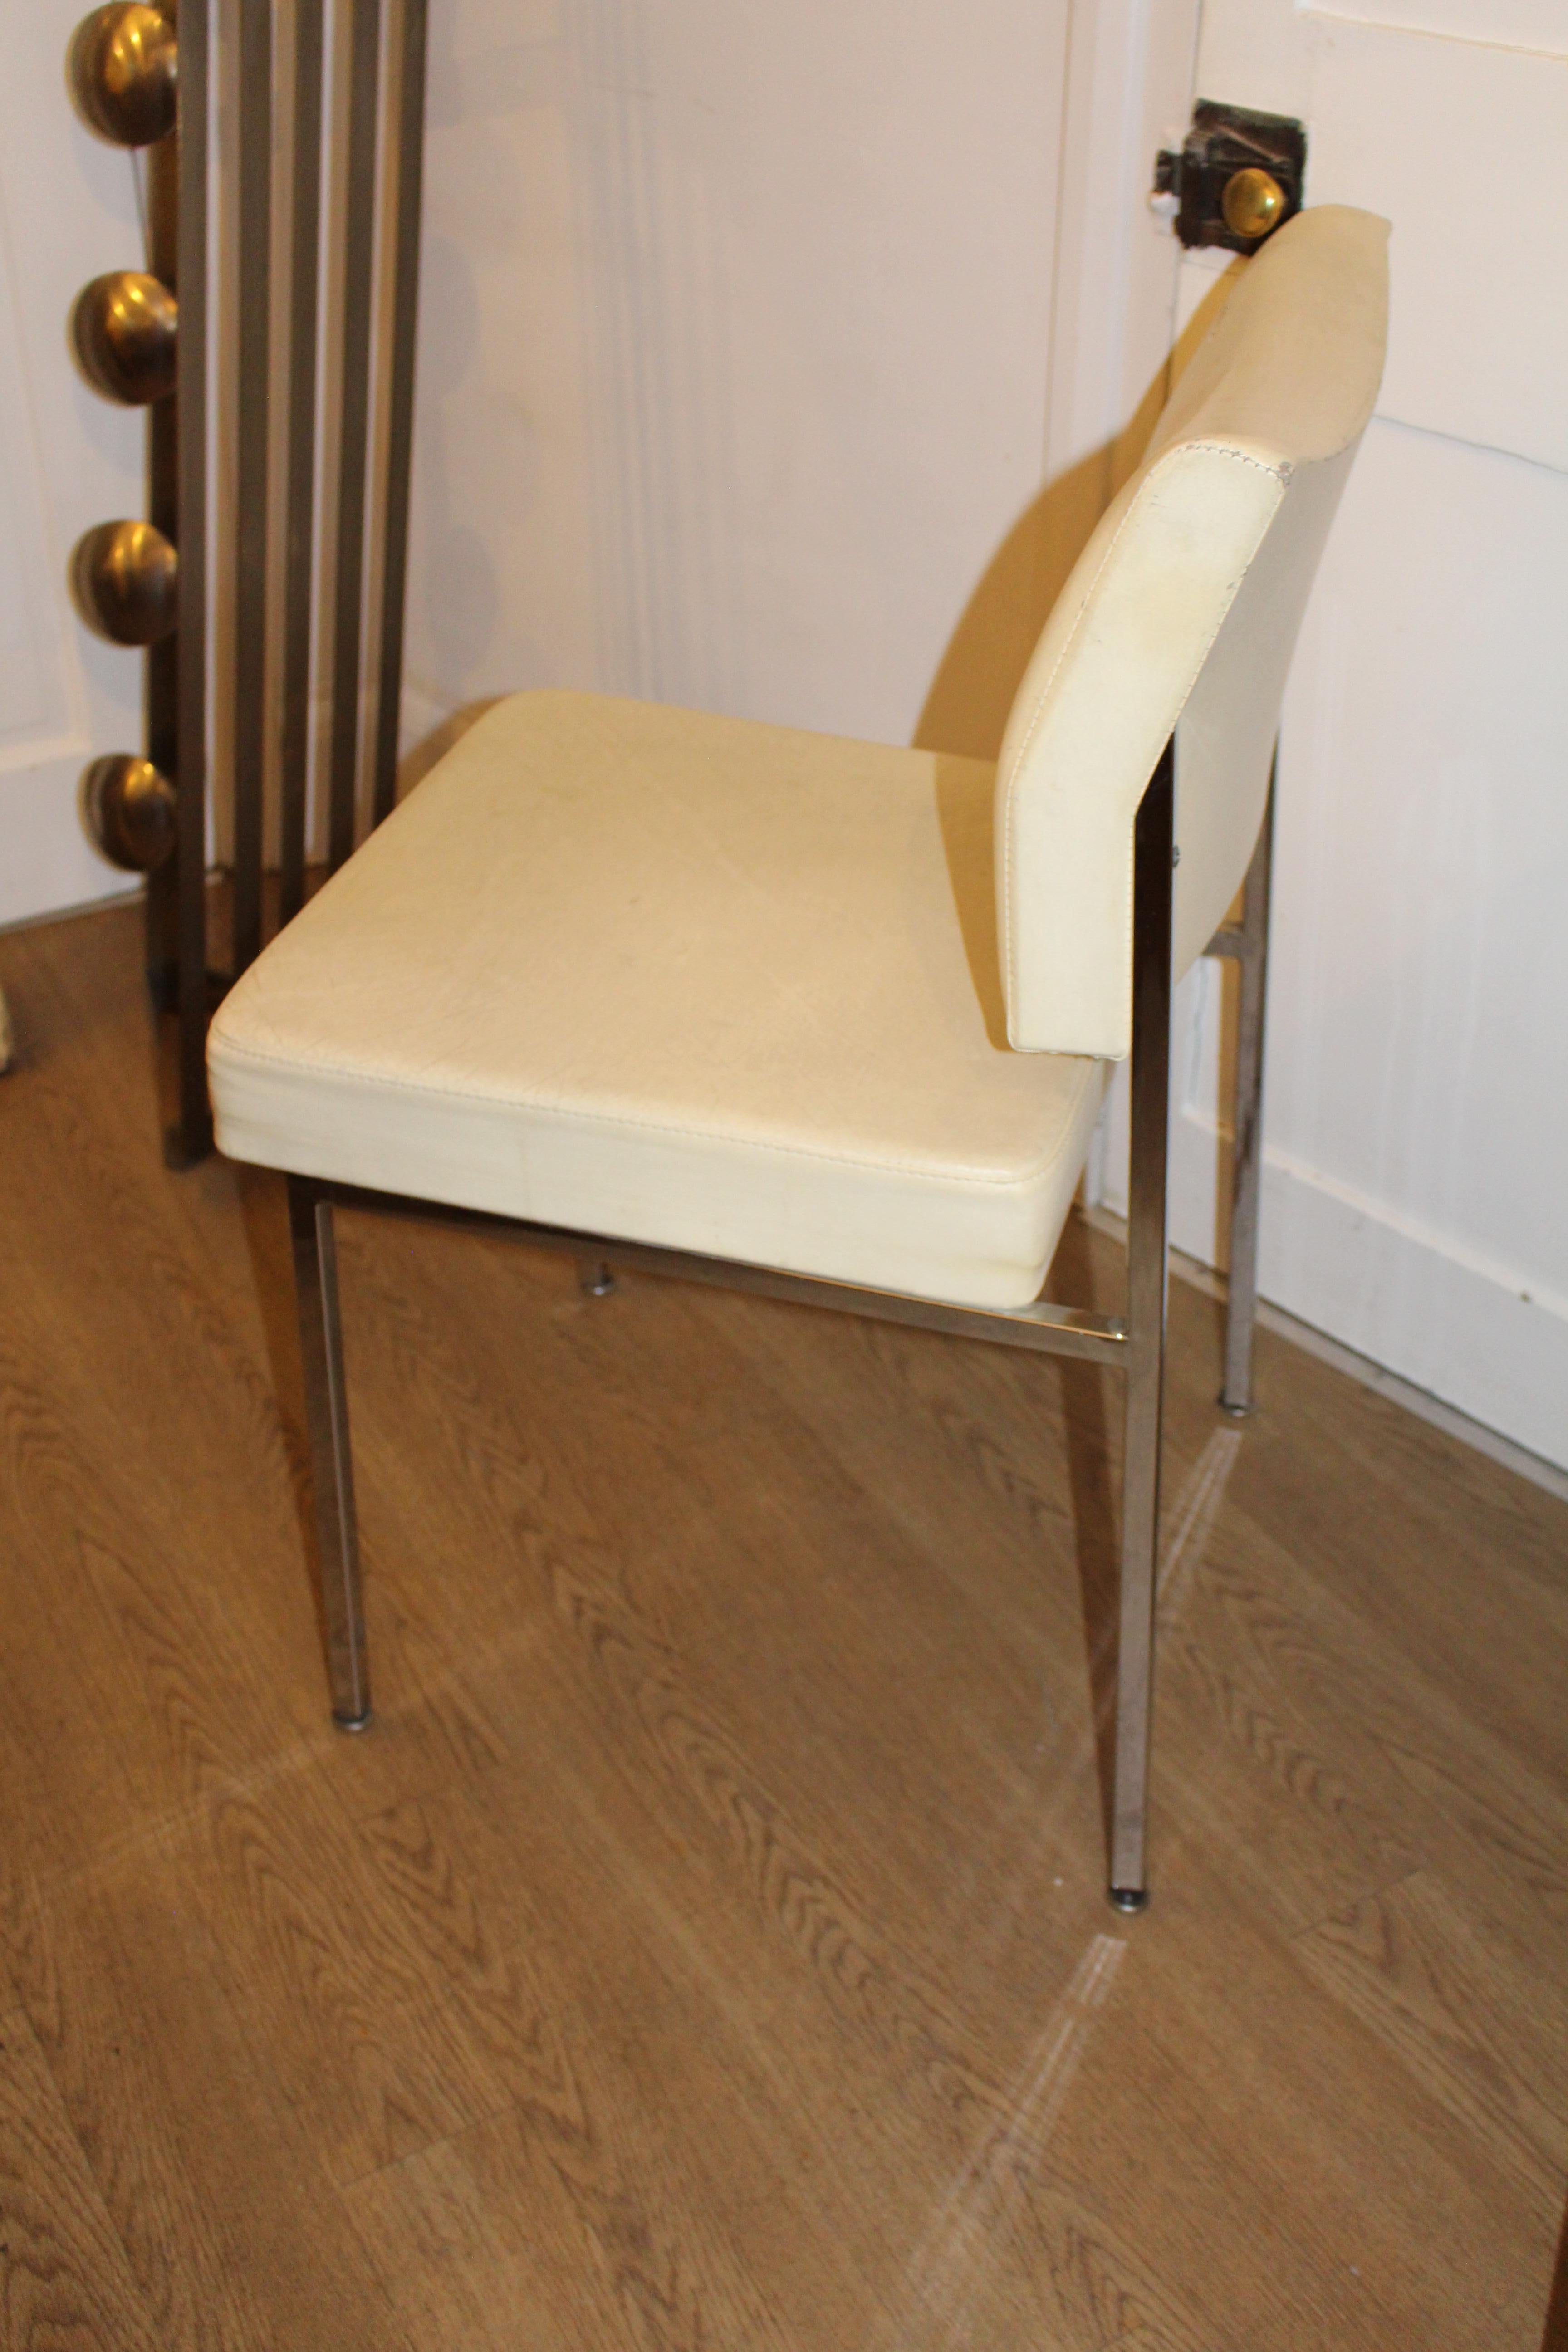 1970's Mid Century Chrome Steel Cream Skai Faux Leather Dining Desk Design Chair In Good Condition For Sale In Dorking, Surrey